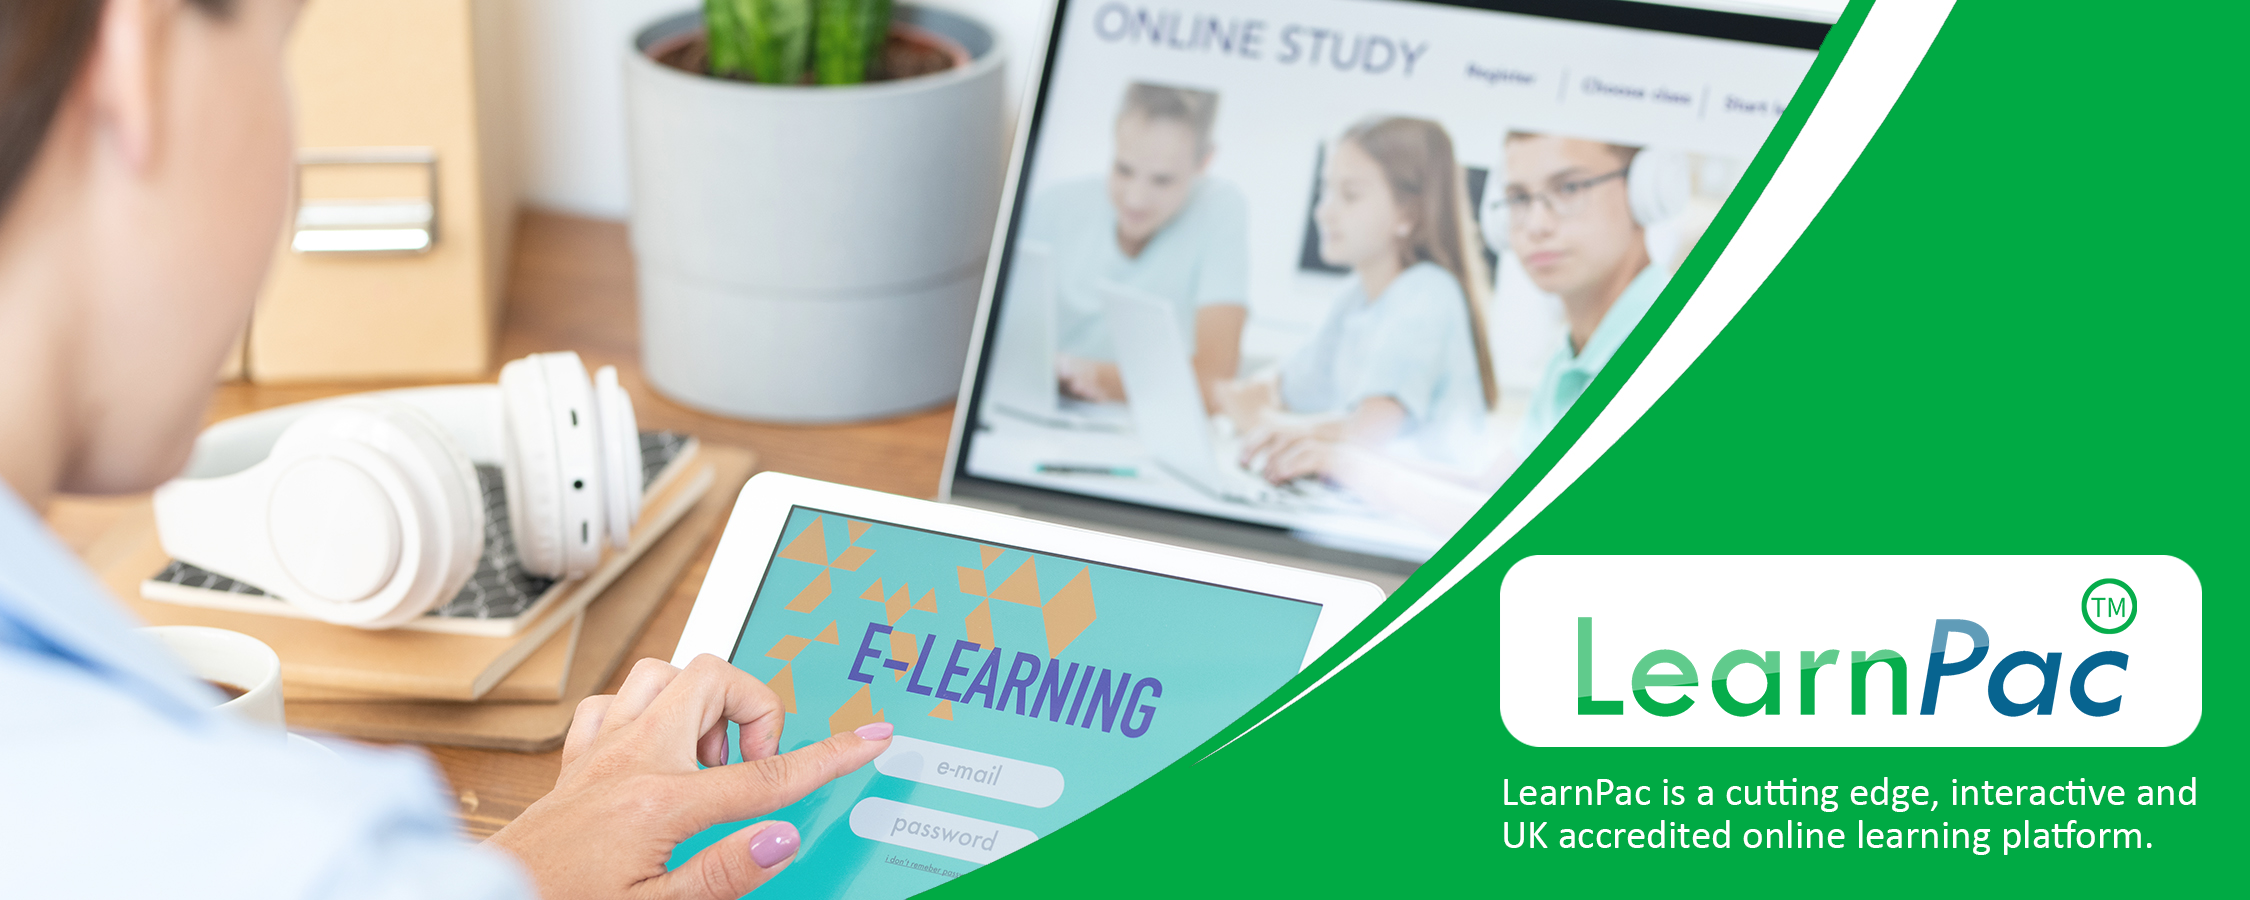 Sepsis Awareness and Management - Online Learning Courses - E-Learning Courses - LearnPac Systems UK --